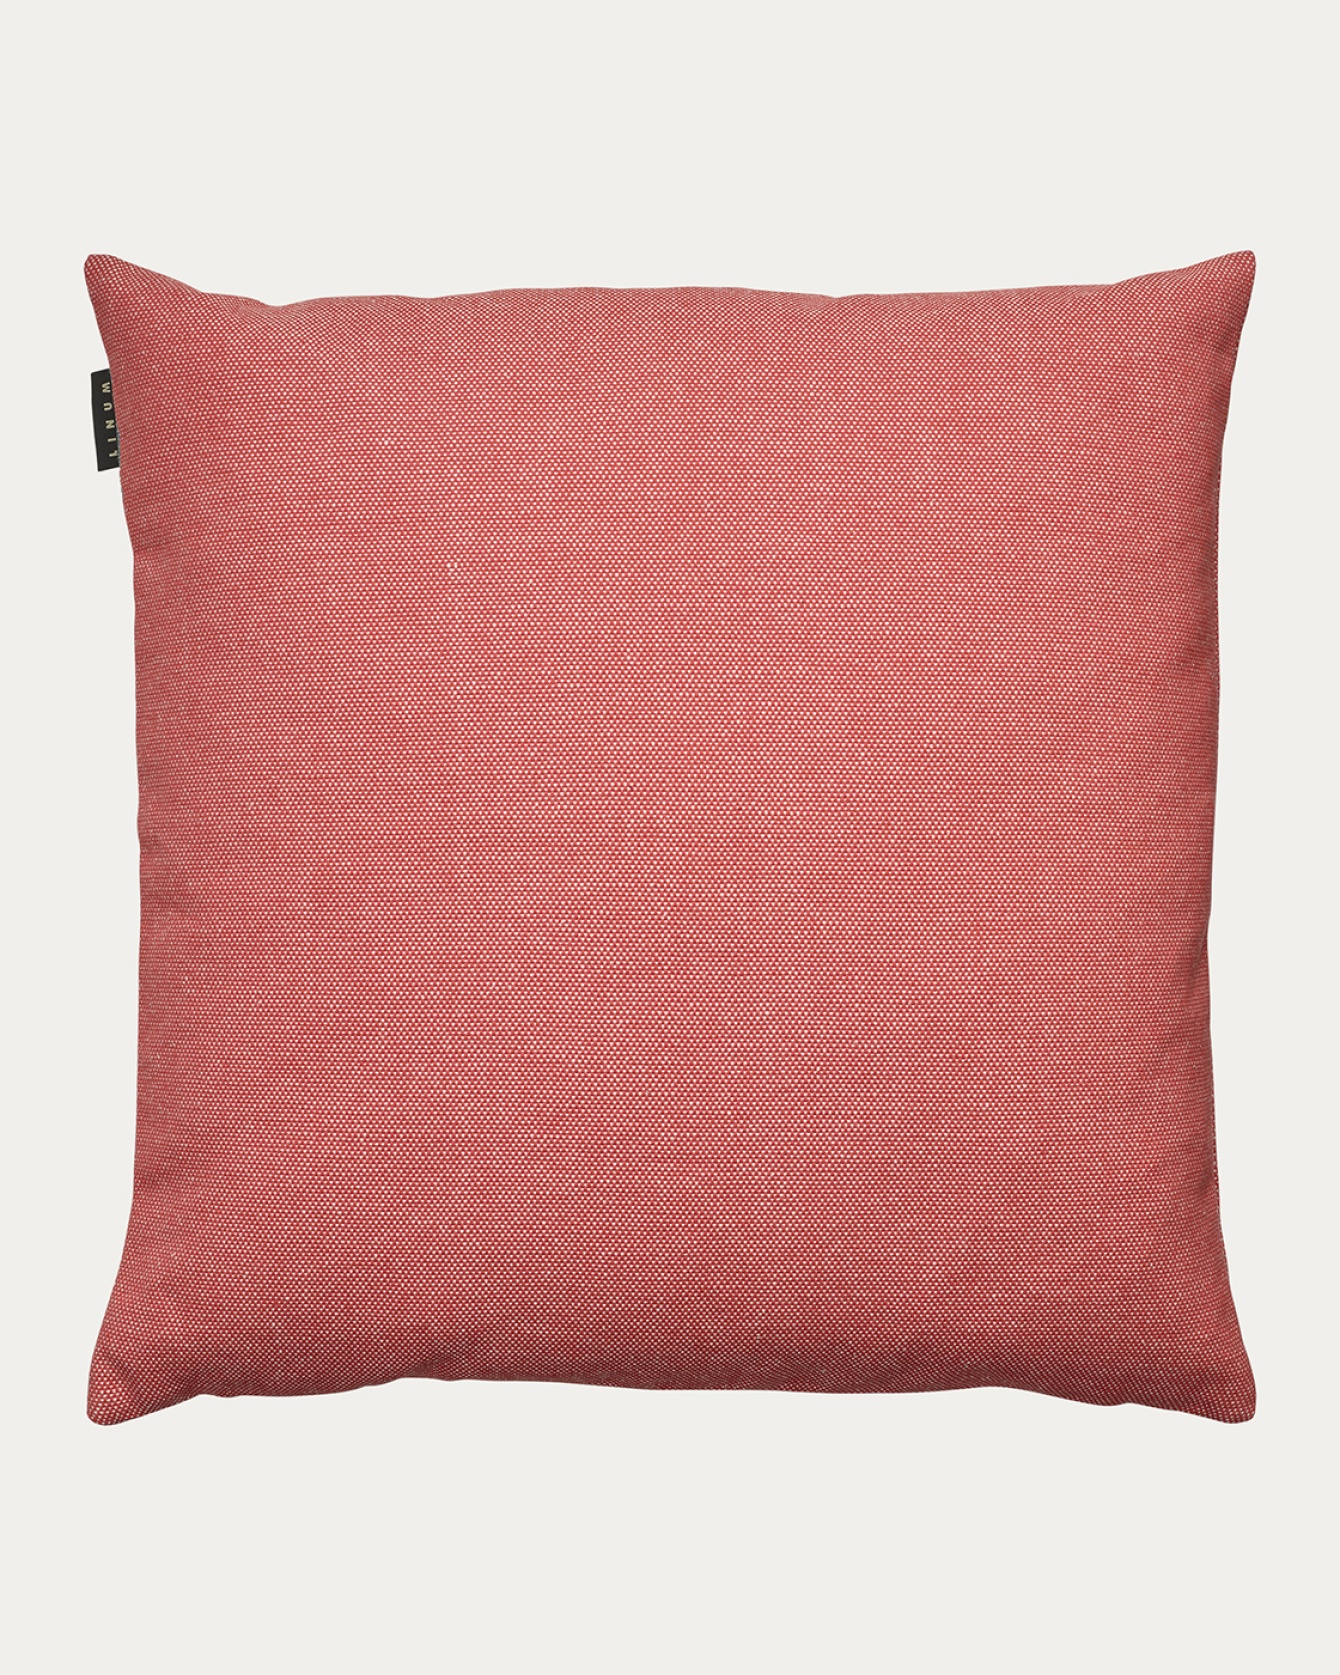 PEPPER Cushion cover 60x60 cm Coral red